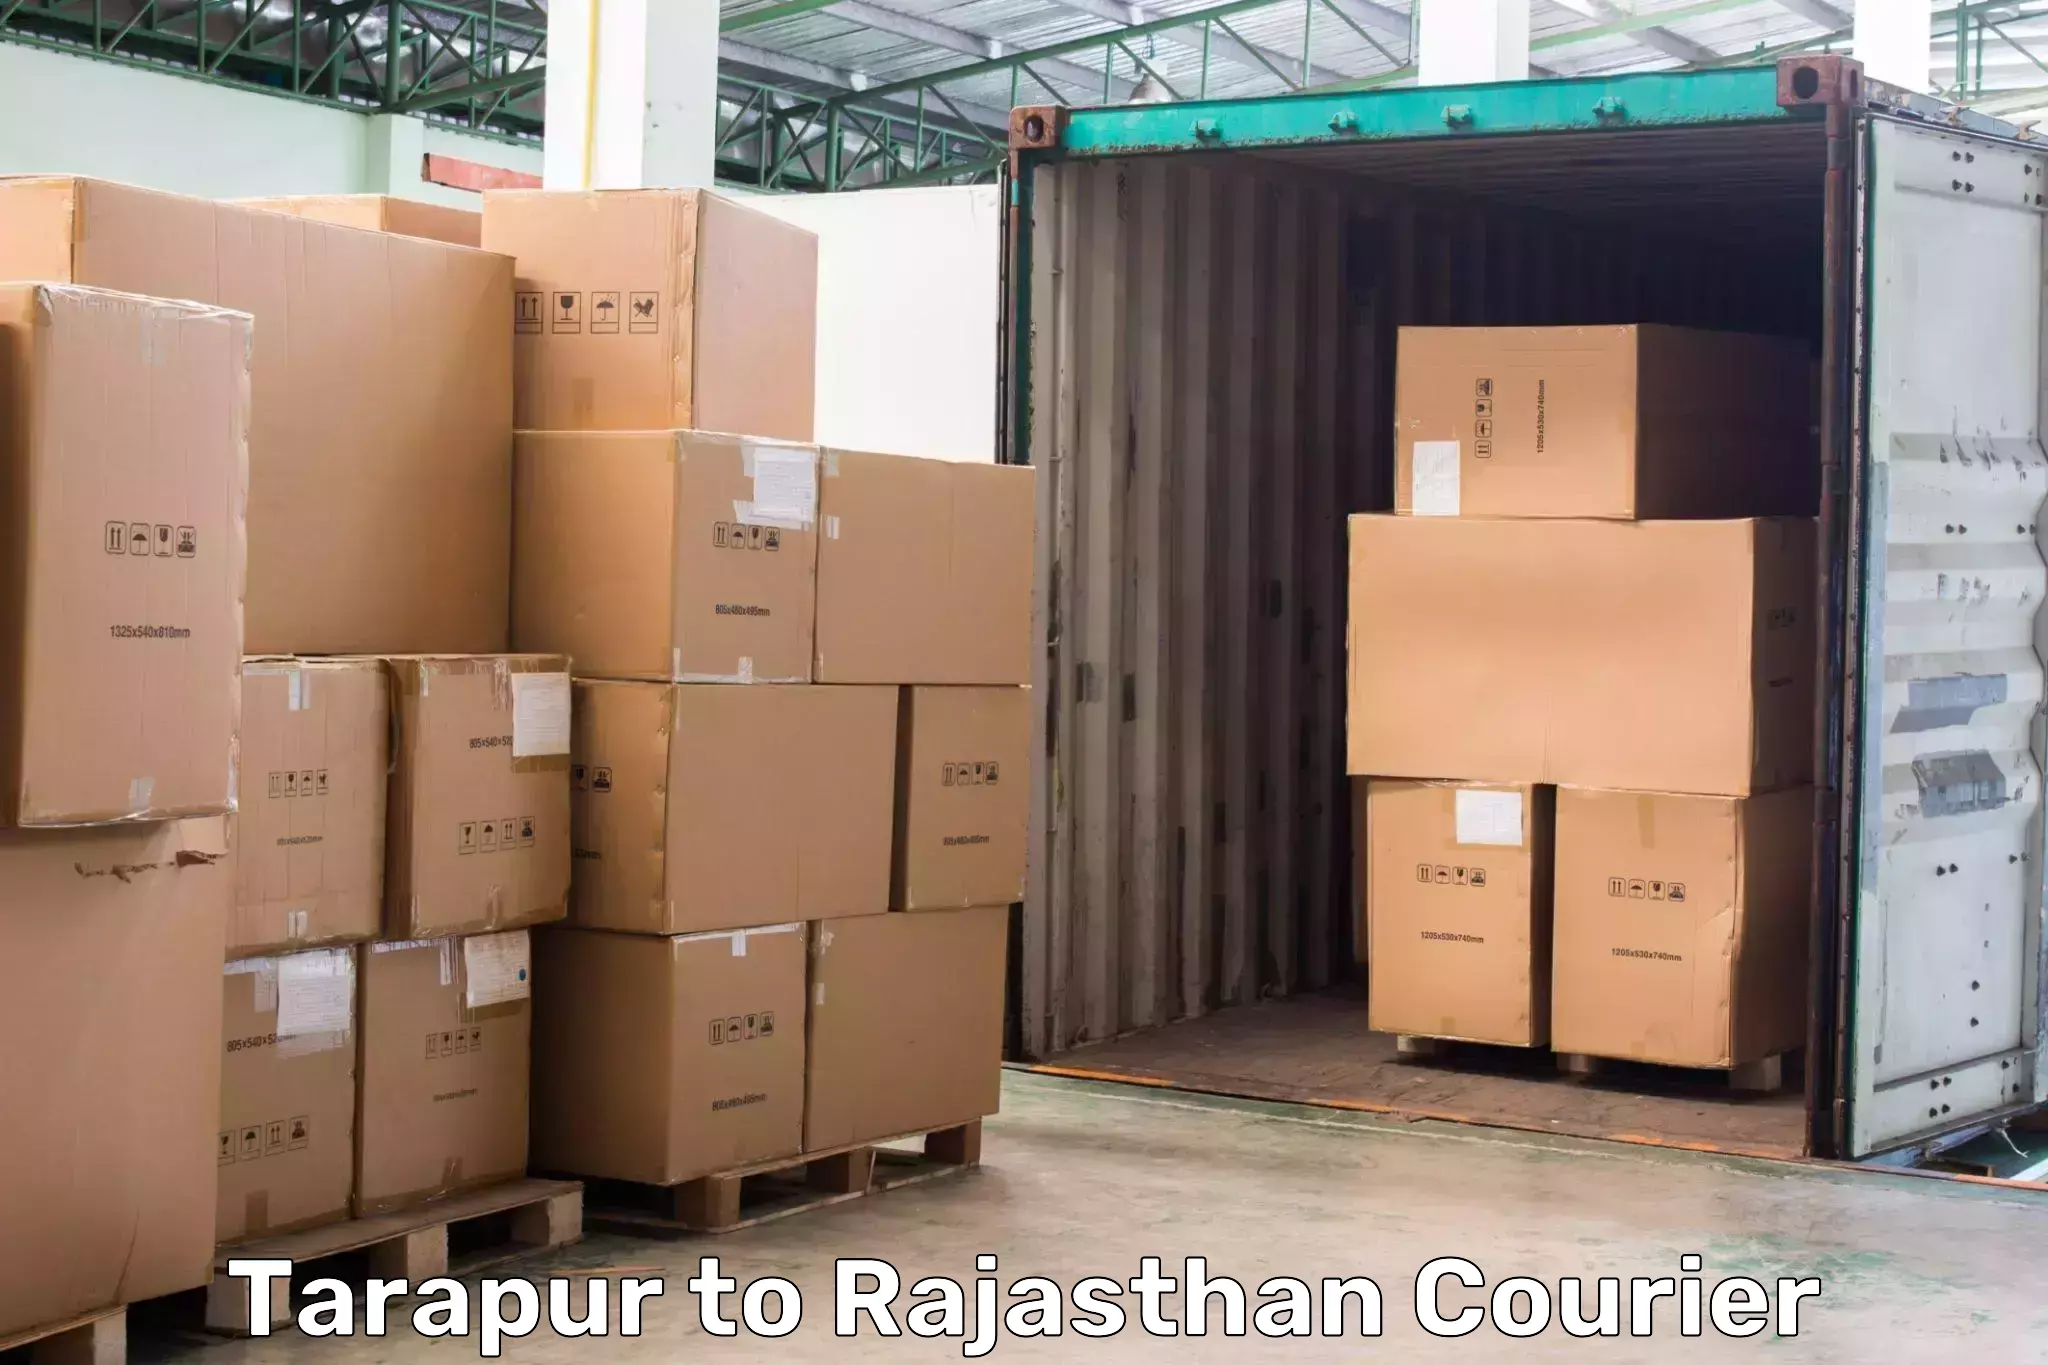 Full-service courier options Tarapur to Rajasthan